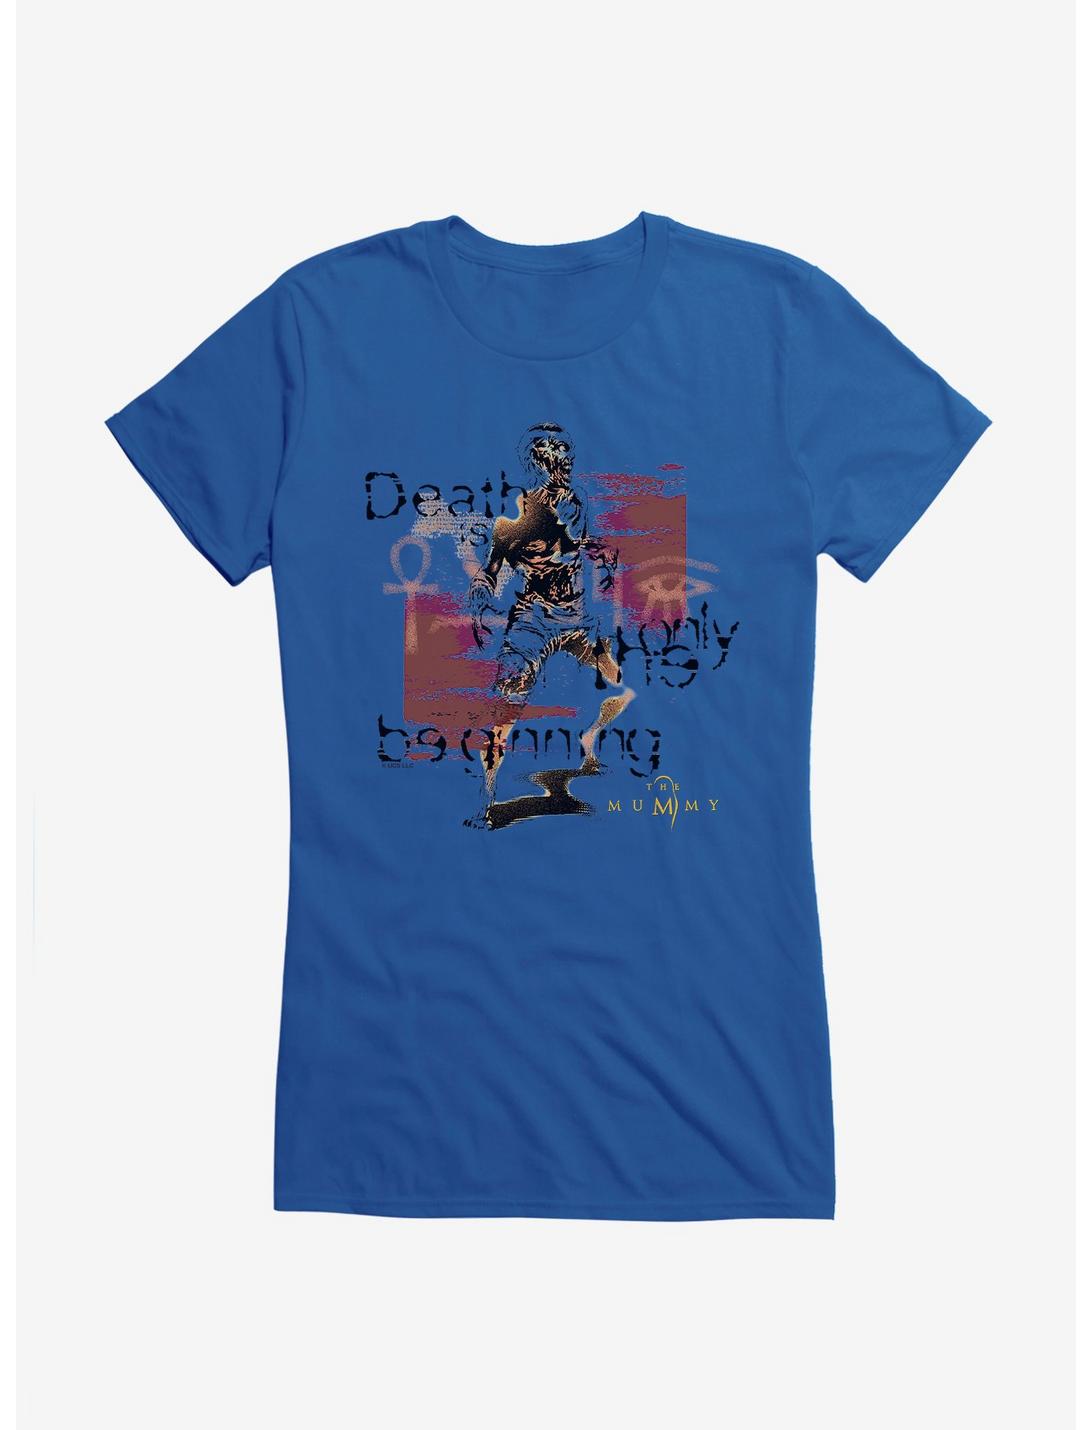 The Mummy Death Is Only The Beginning Girls T-Shirt, ROYAL, hi-res